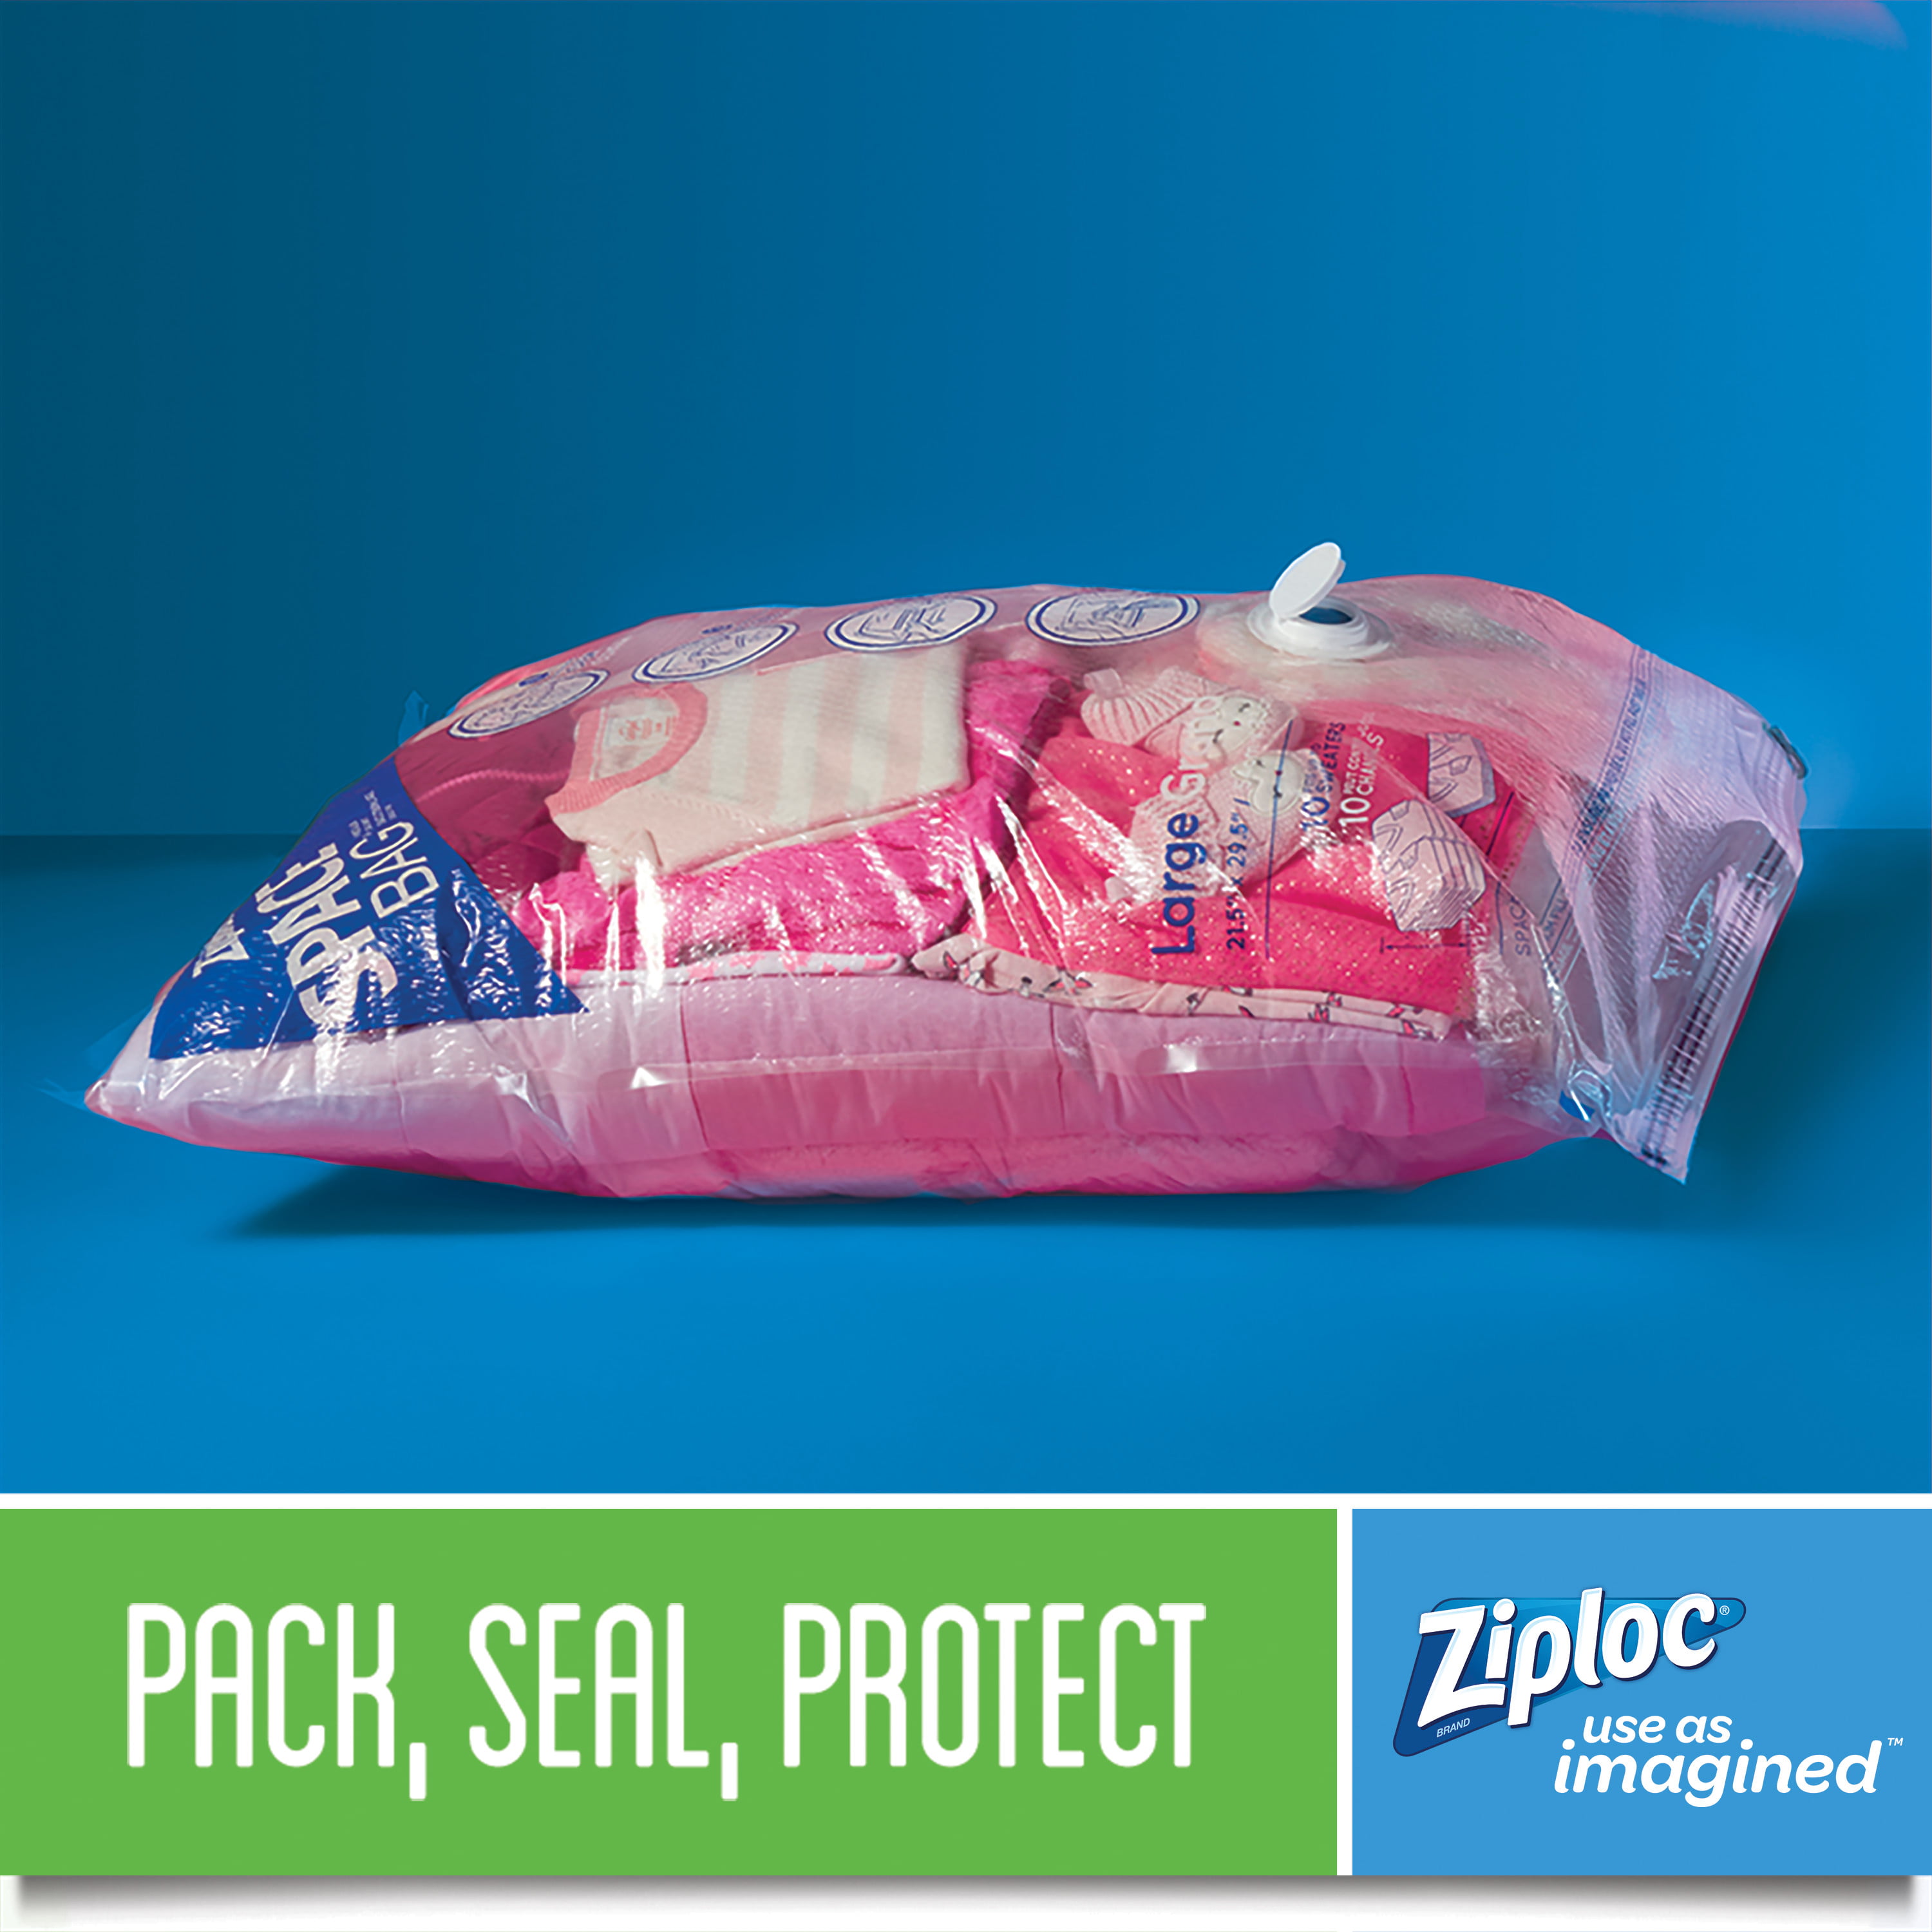 Ziploc Space Bags Variety Pack, 13 ct. - Clear